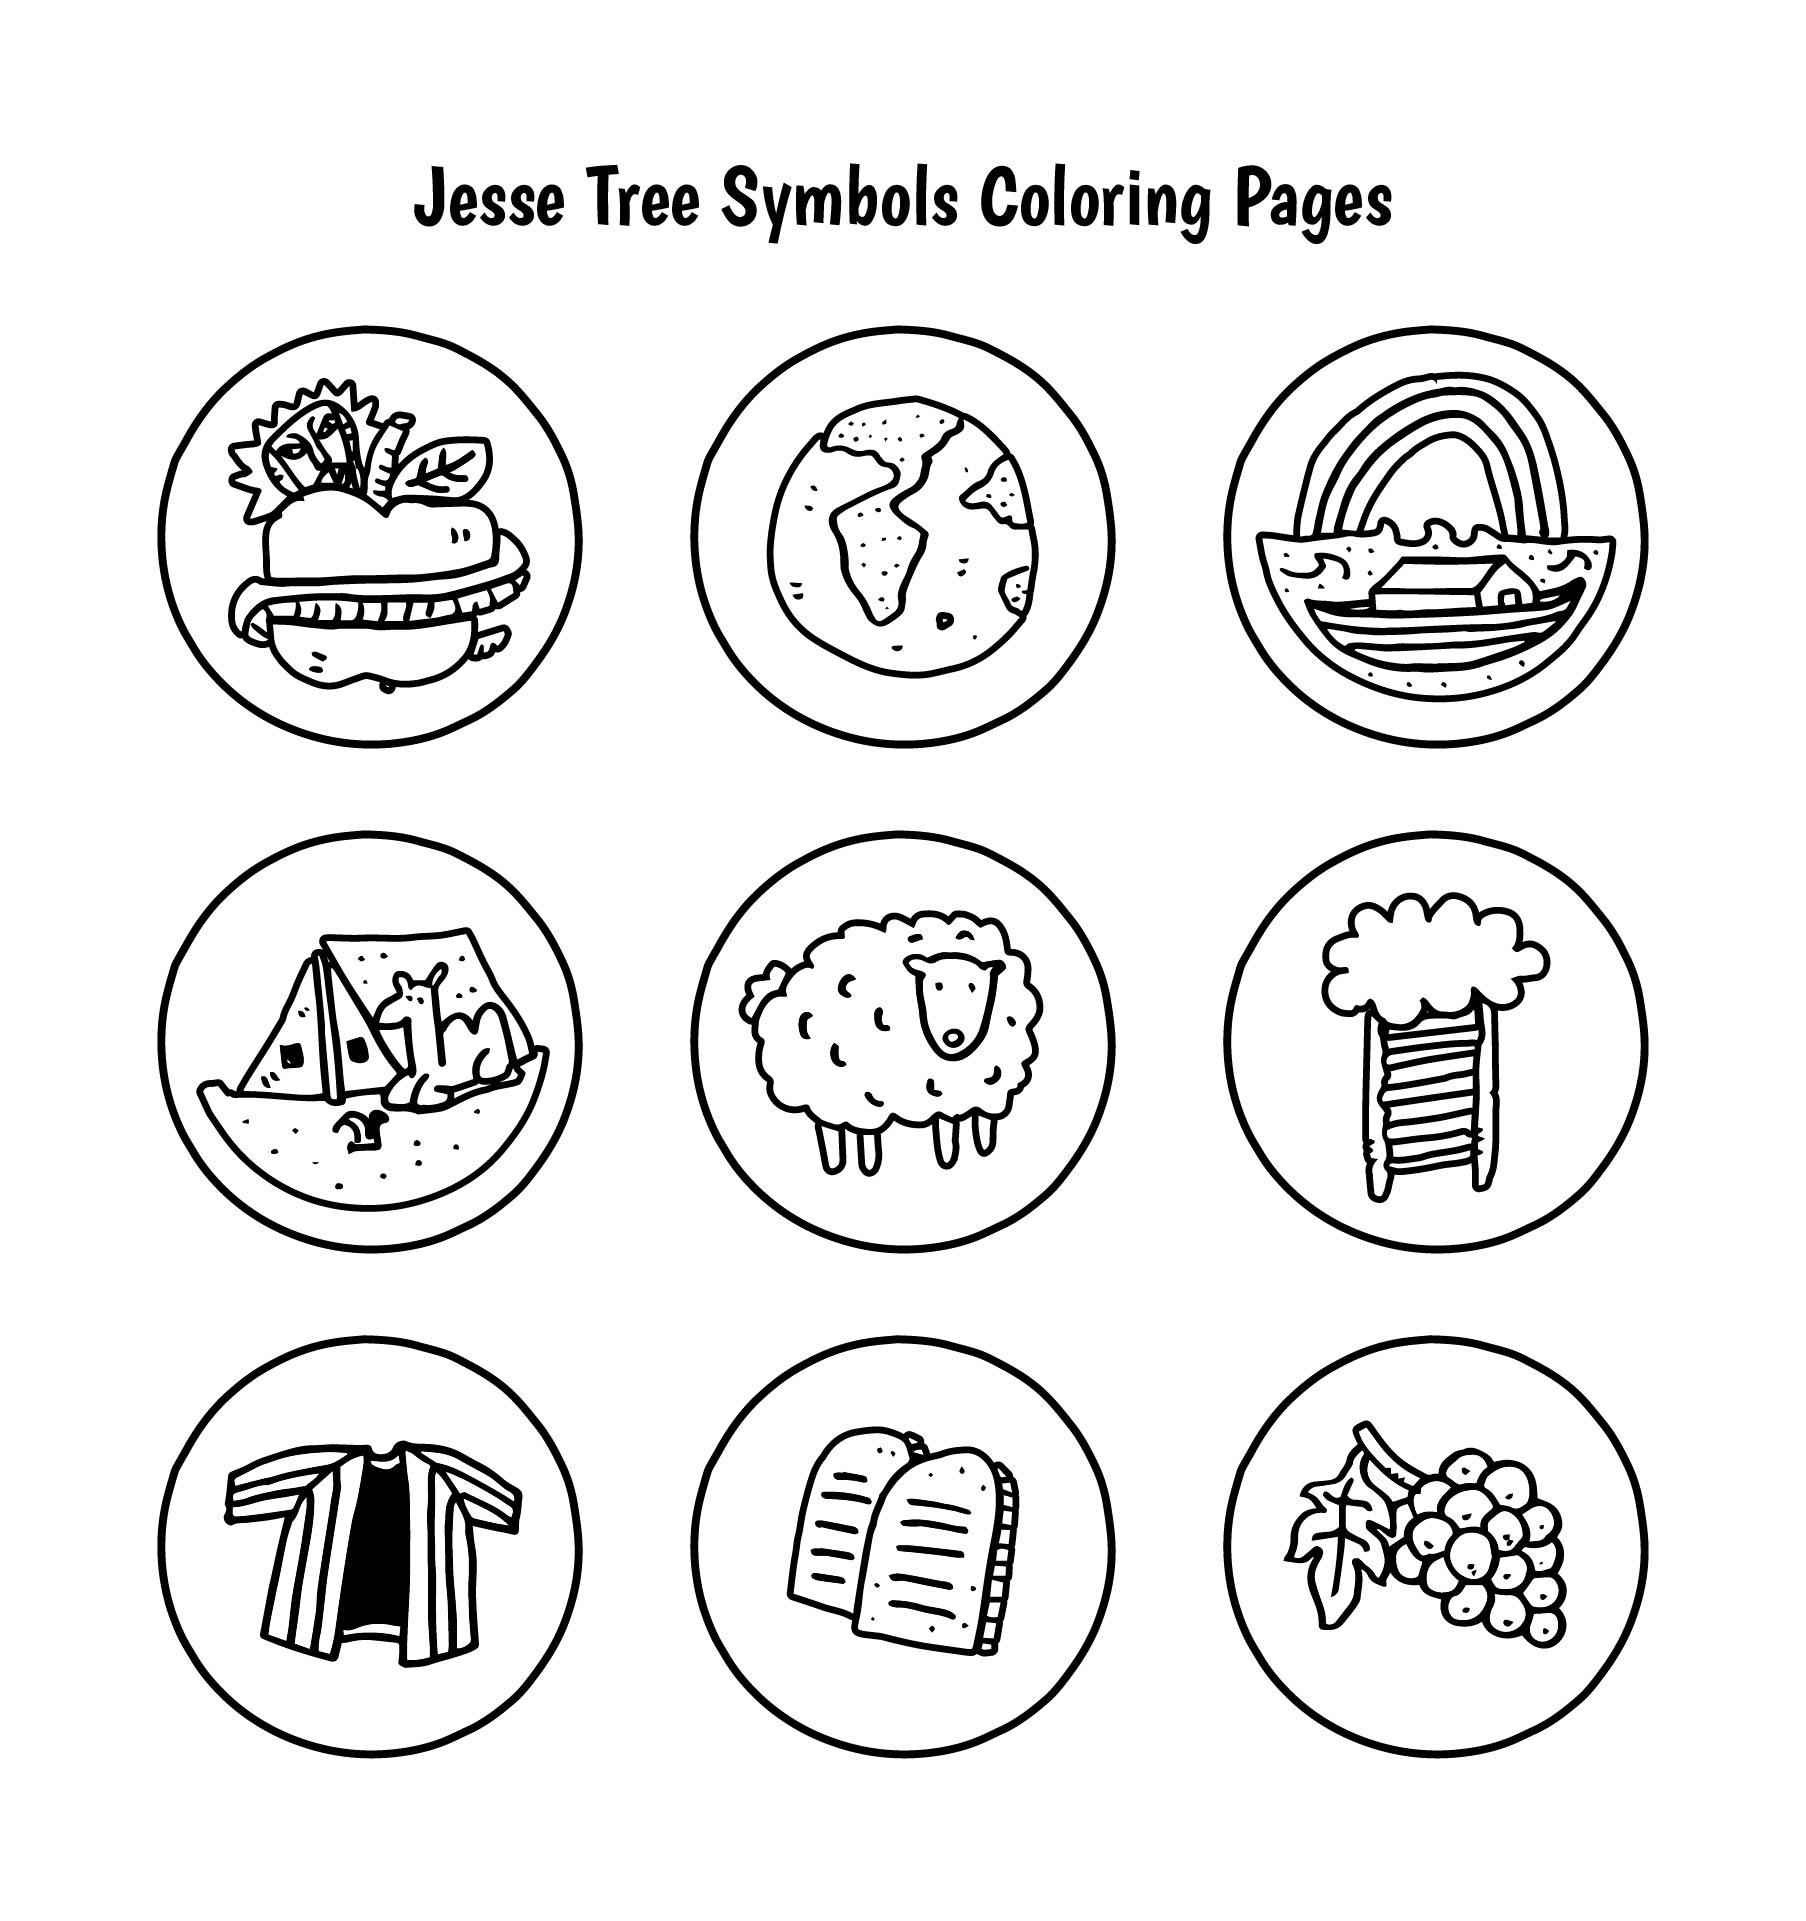 jesse-tree-symbols-coloring-pages-coloring-pages